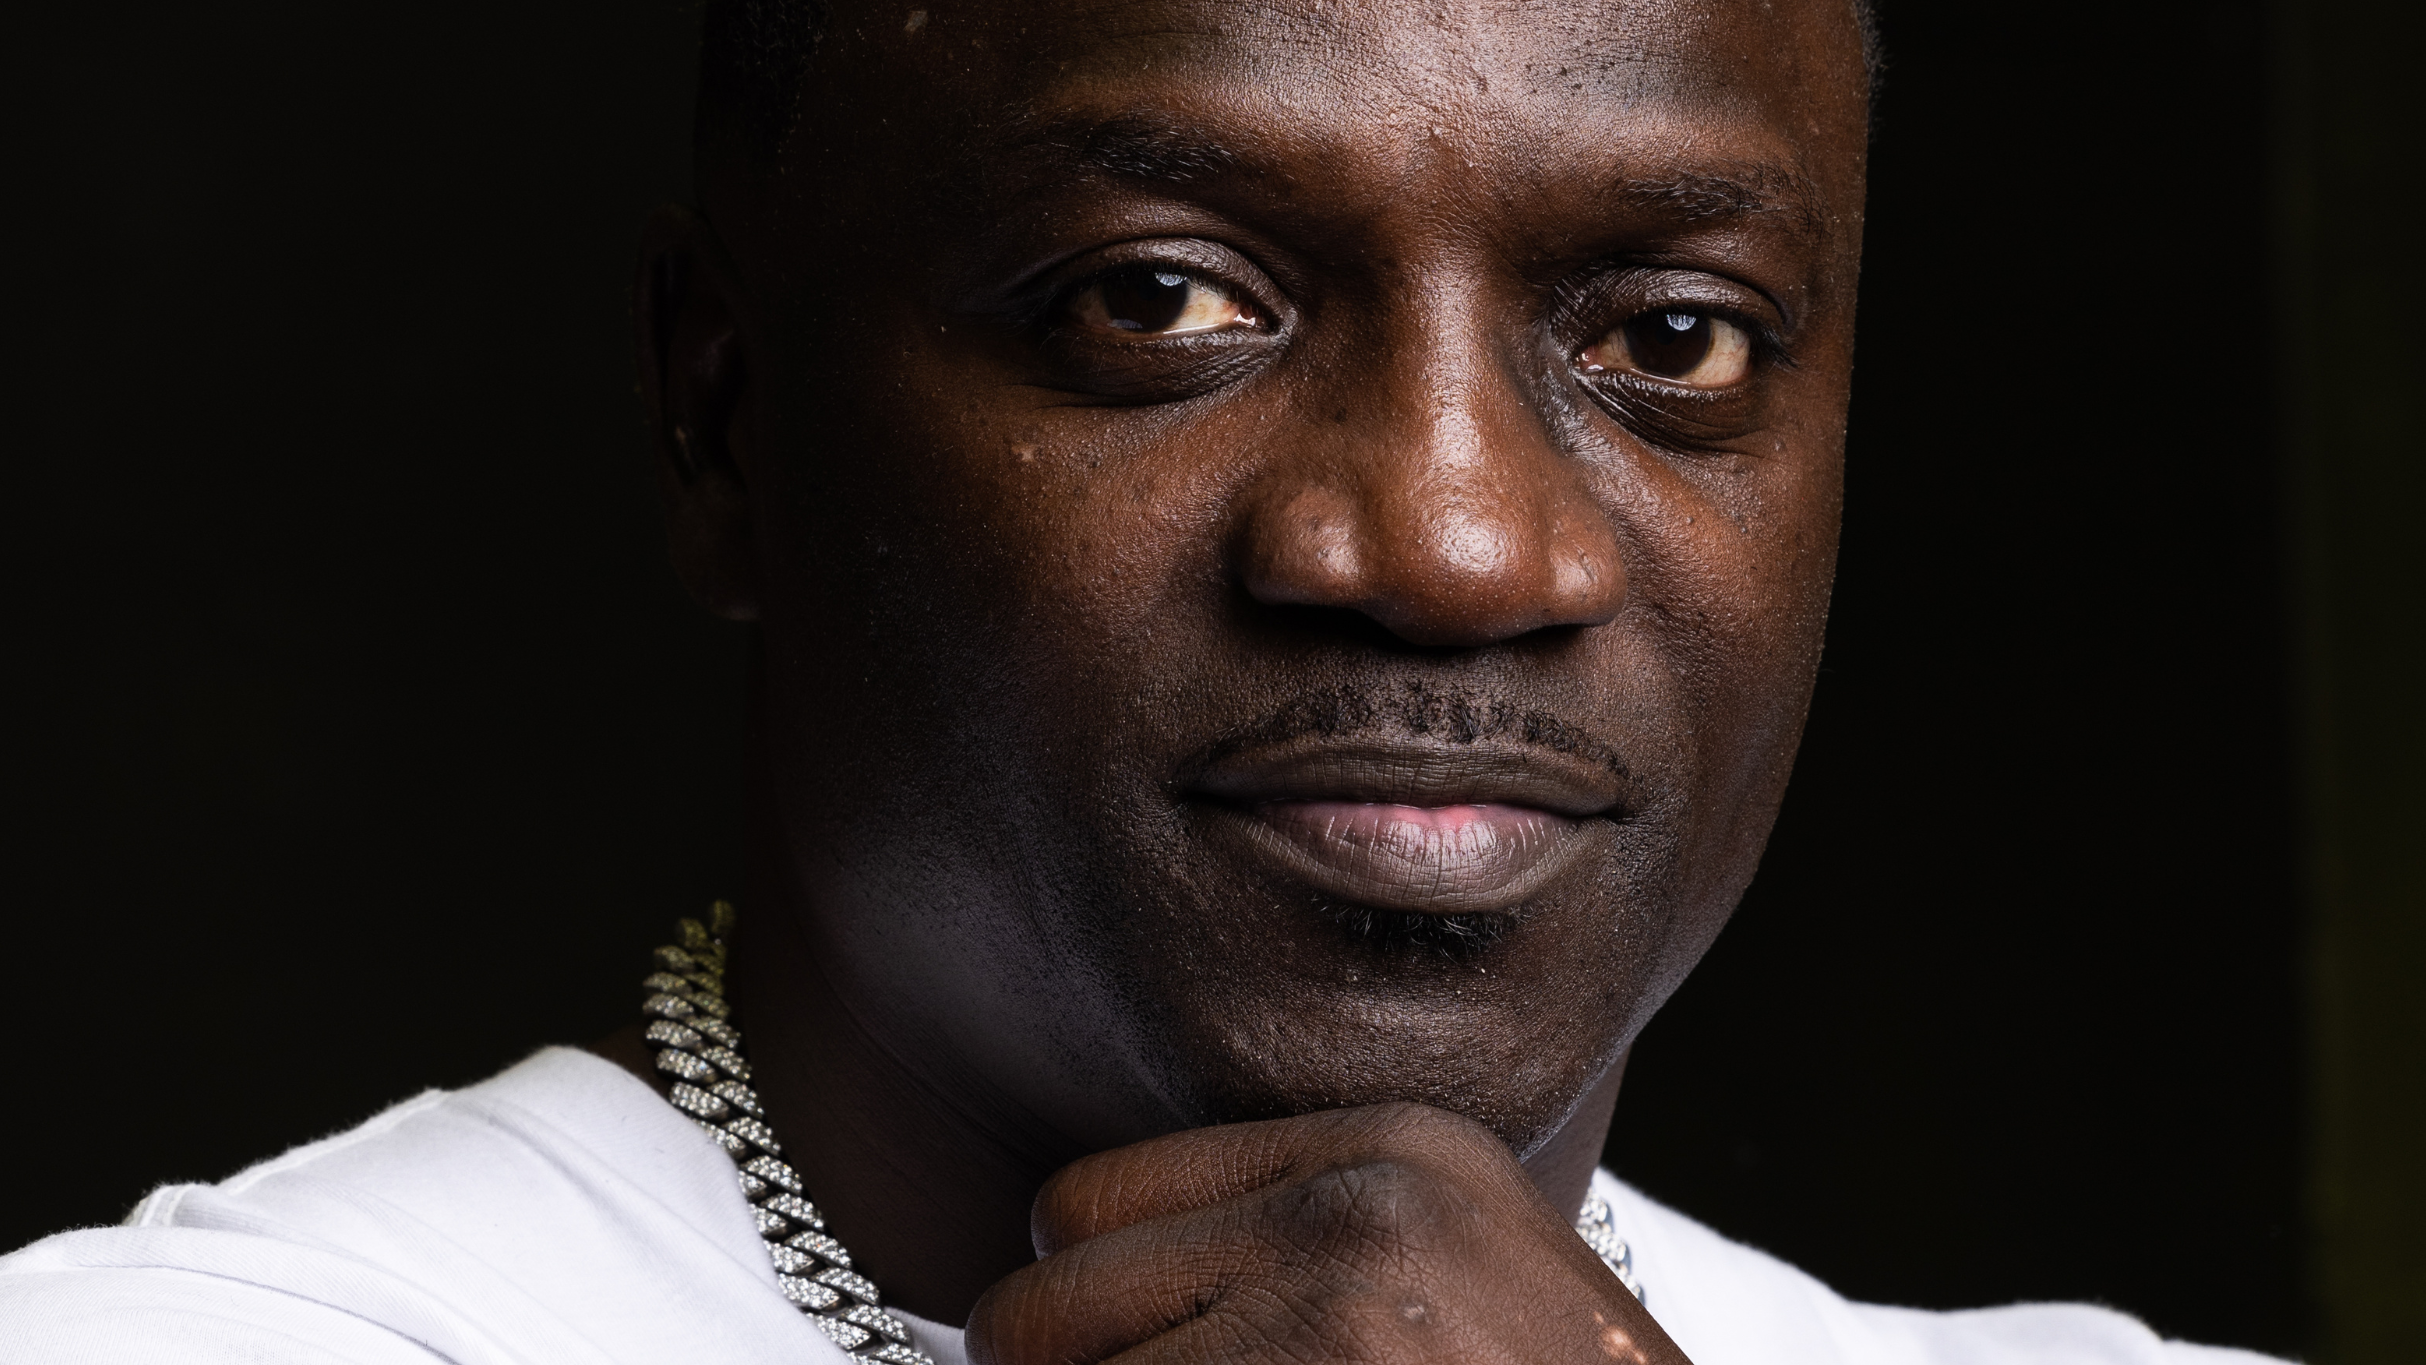 AKON Super Fan Tour free presale code for show tickets in Houston, TX (Bayou Music Center)